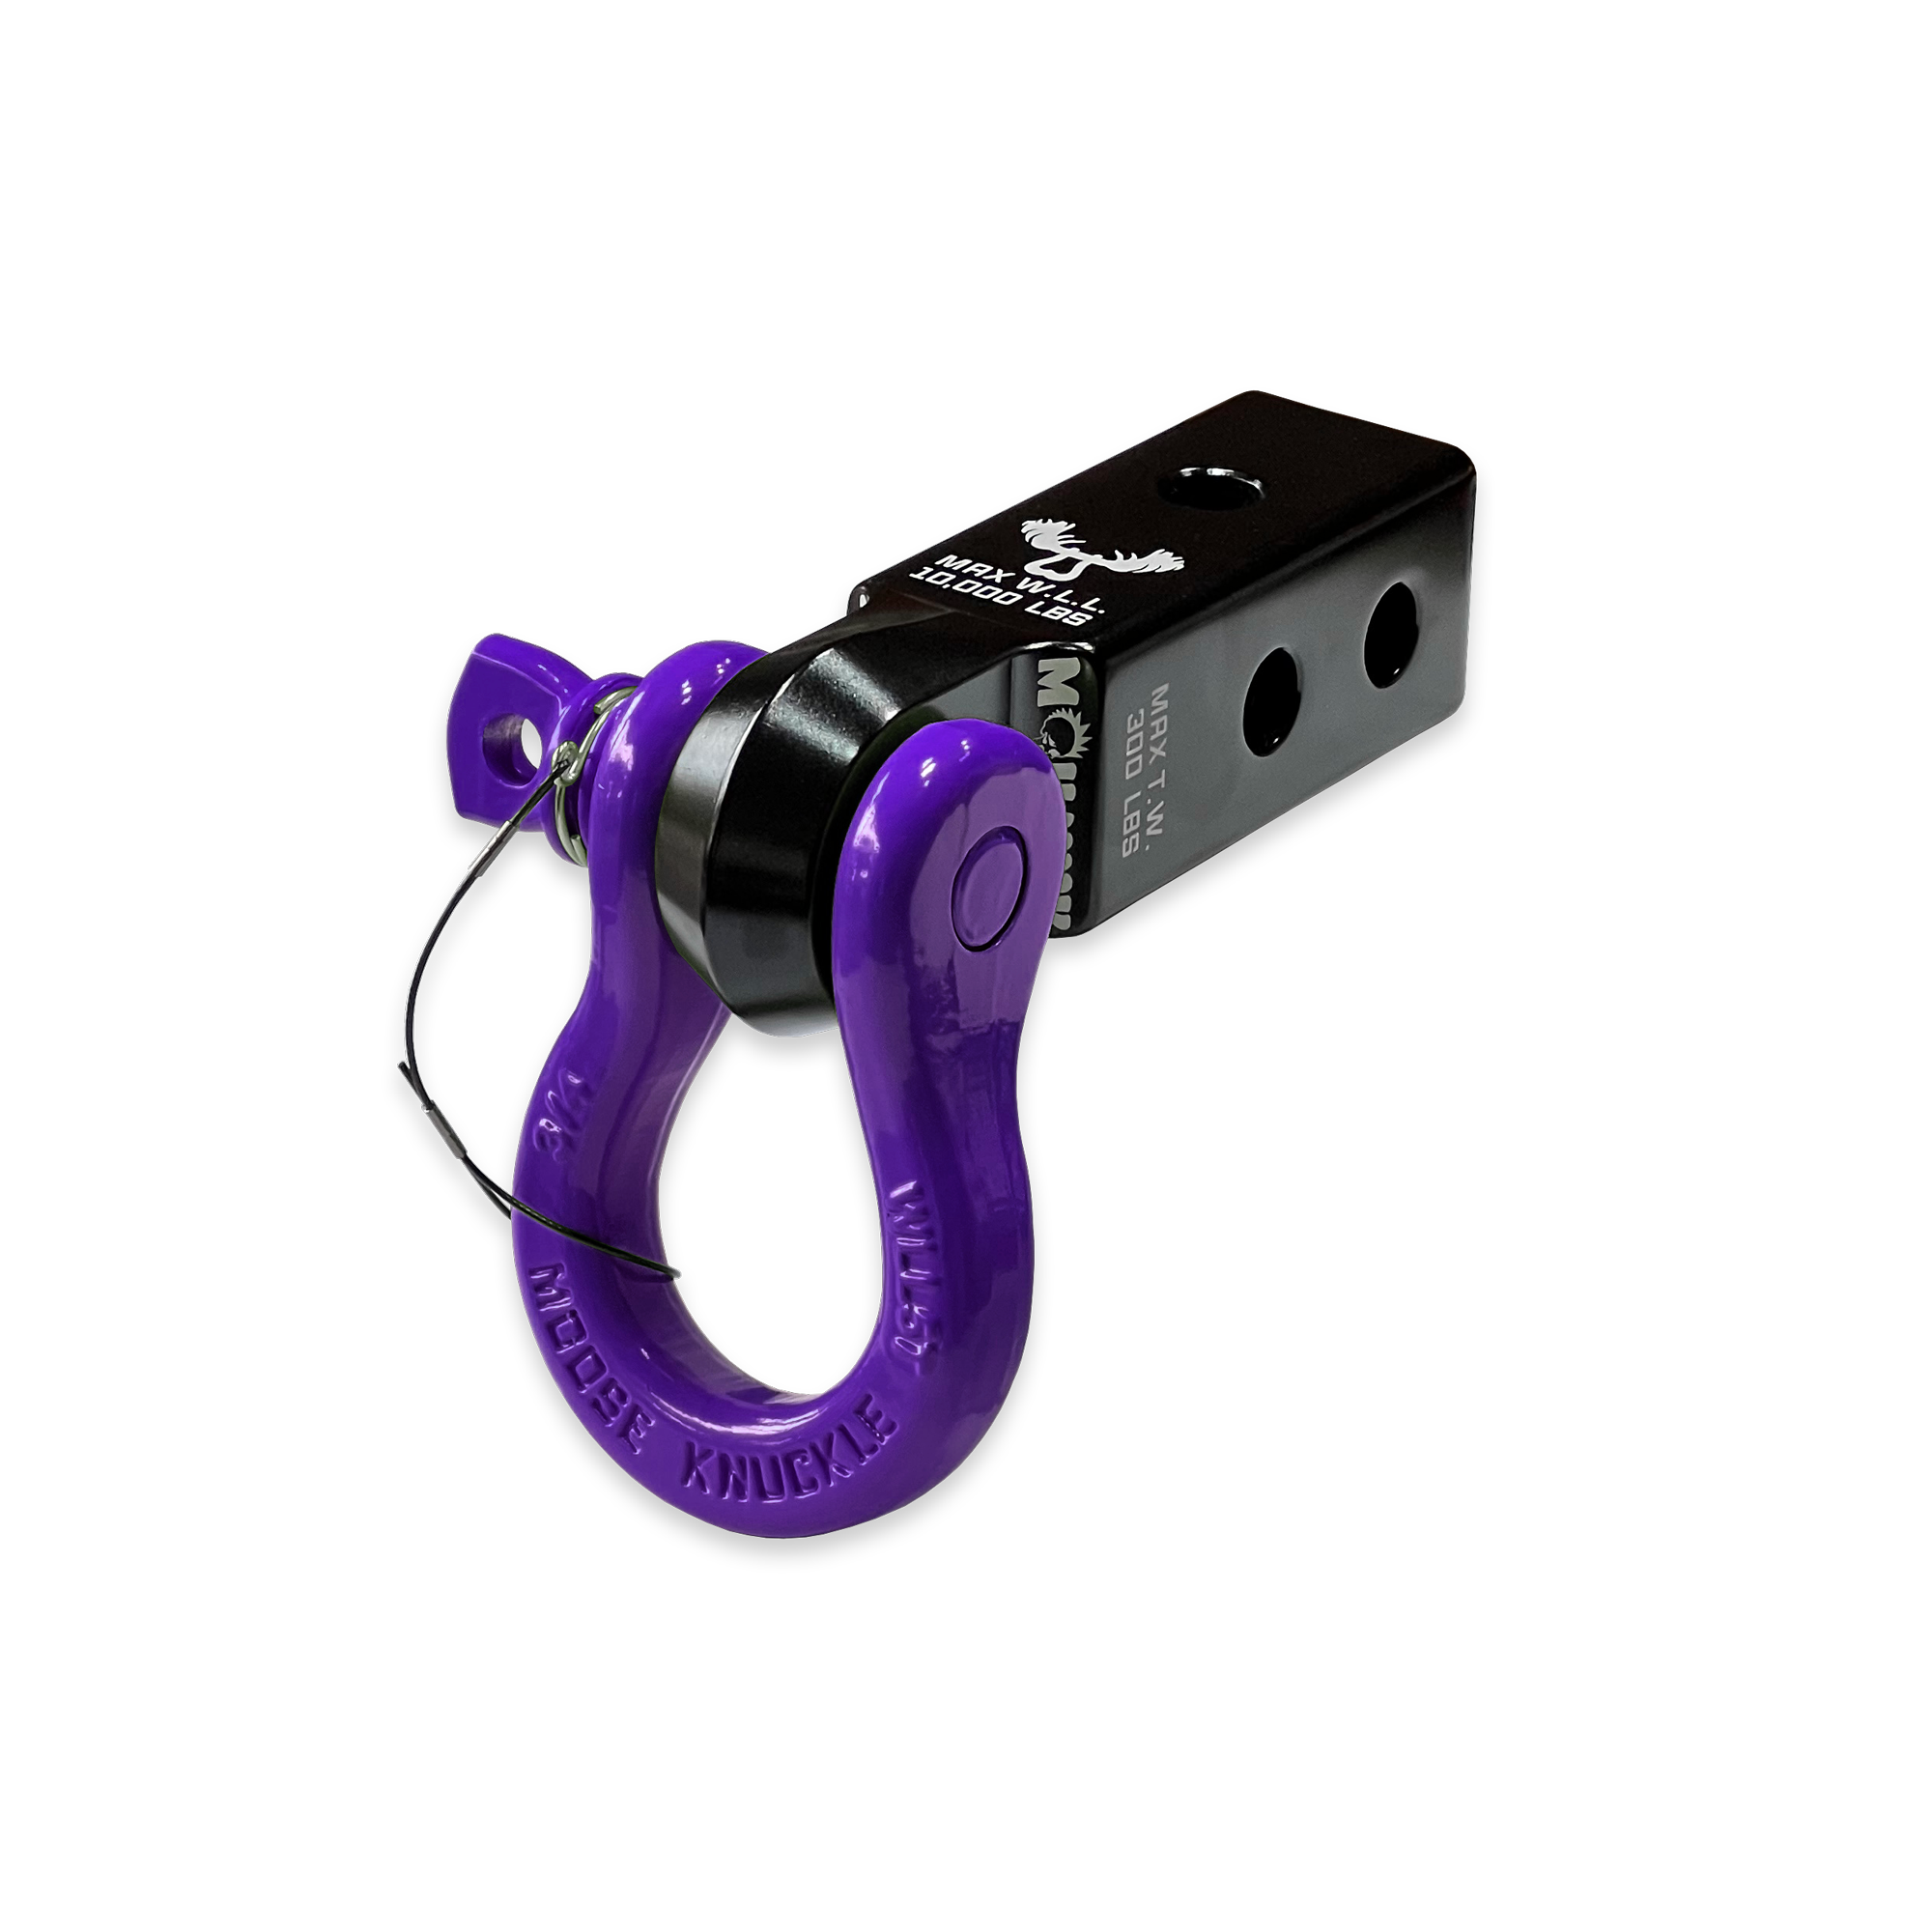 B'oh 3/4 Spin Pin Shackle and Mohawk 2.0 Receiver Combo